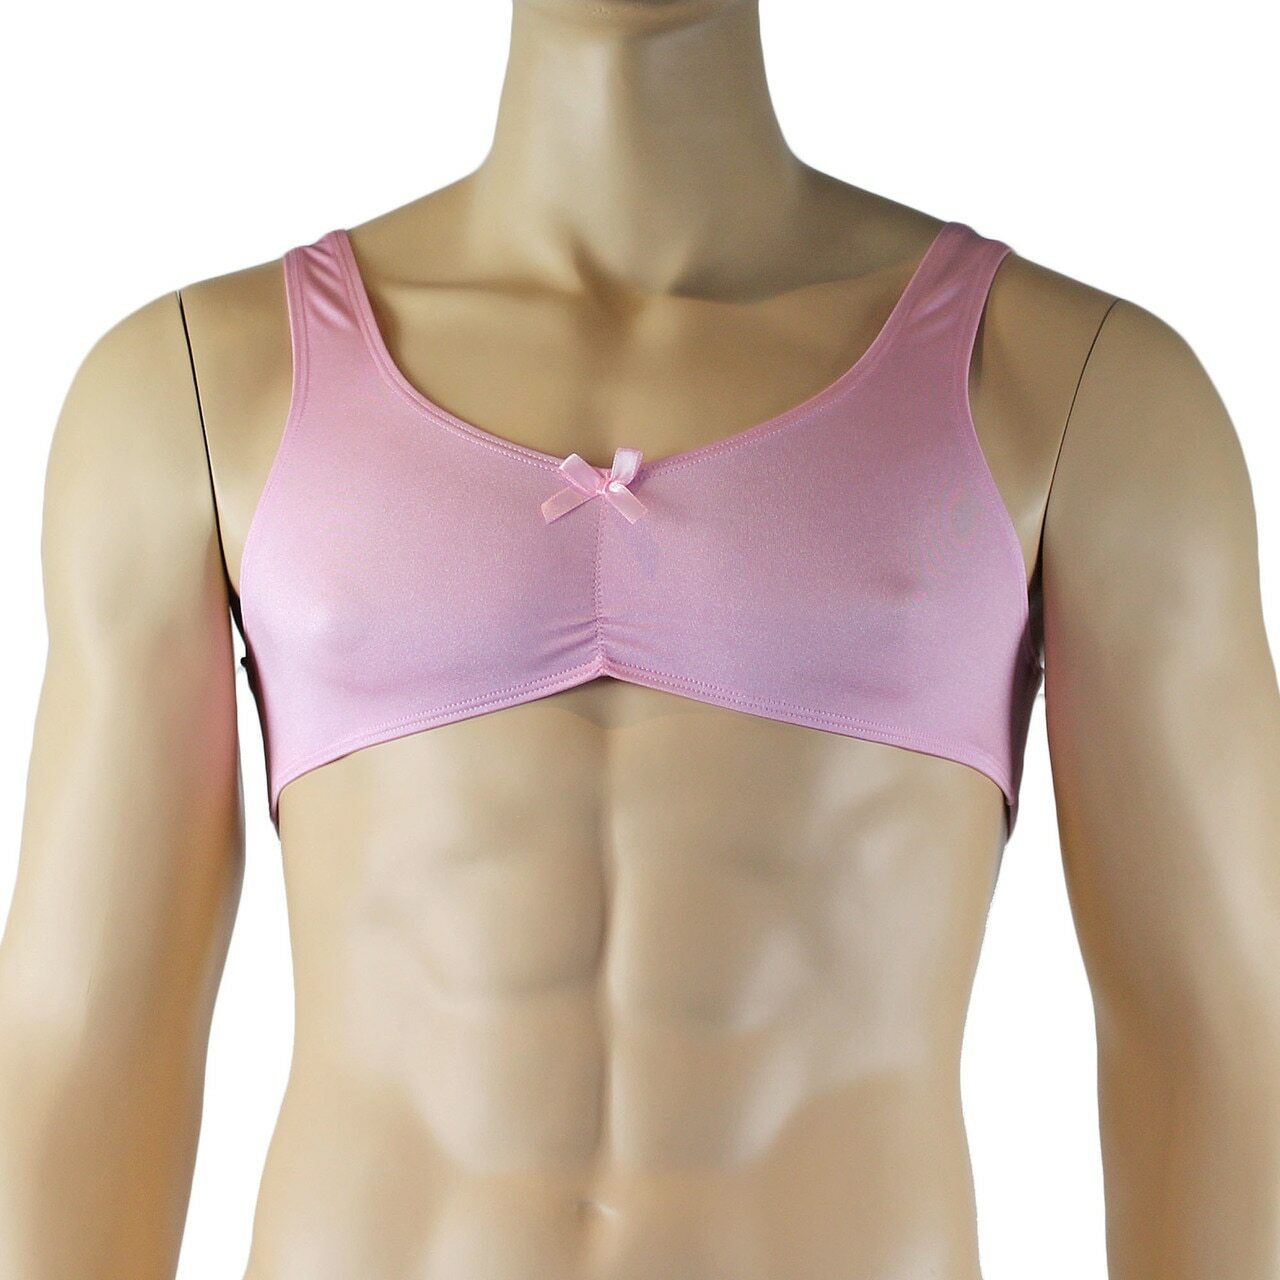 Male Stretch Lycra Bra Top & Matching Thong with Bow